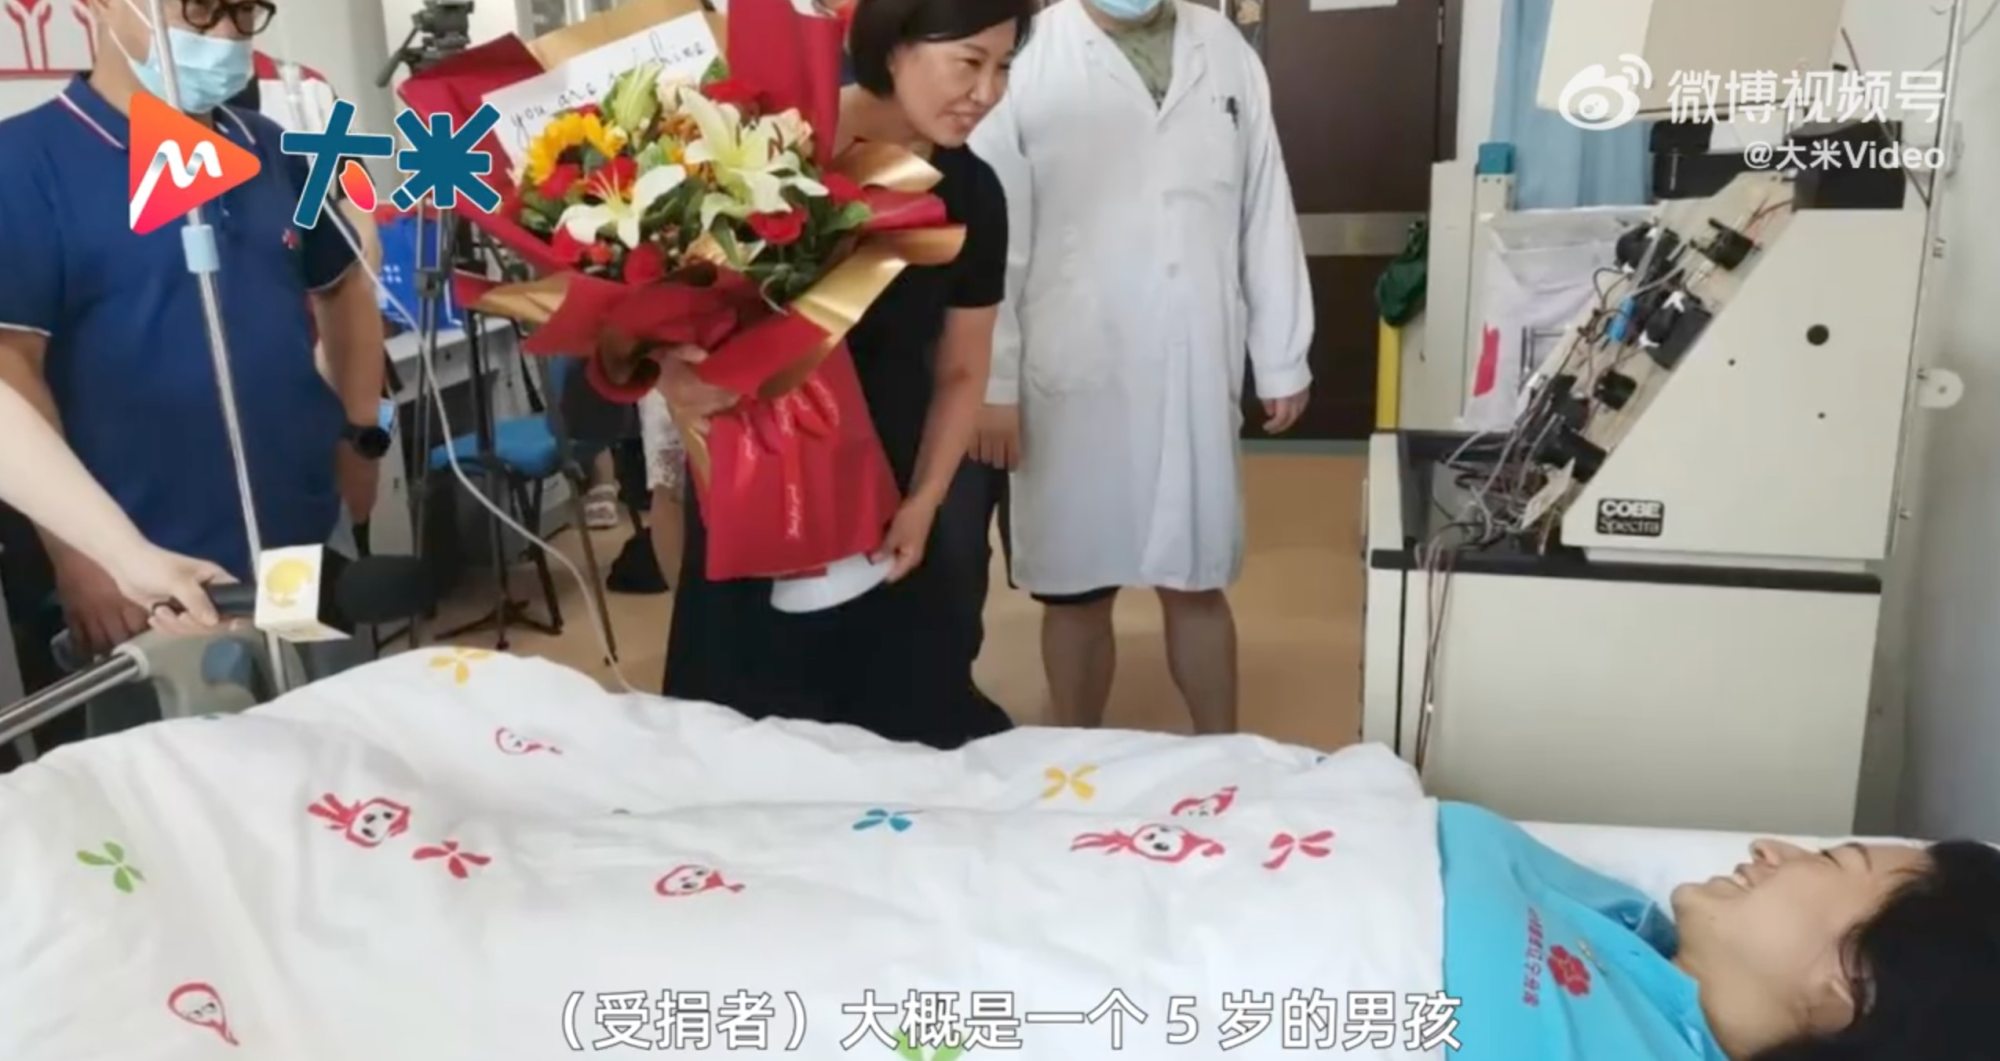 Tan receives visitors in the hospital while recovering from the bone marrow donation. Photo: Weibo